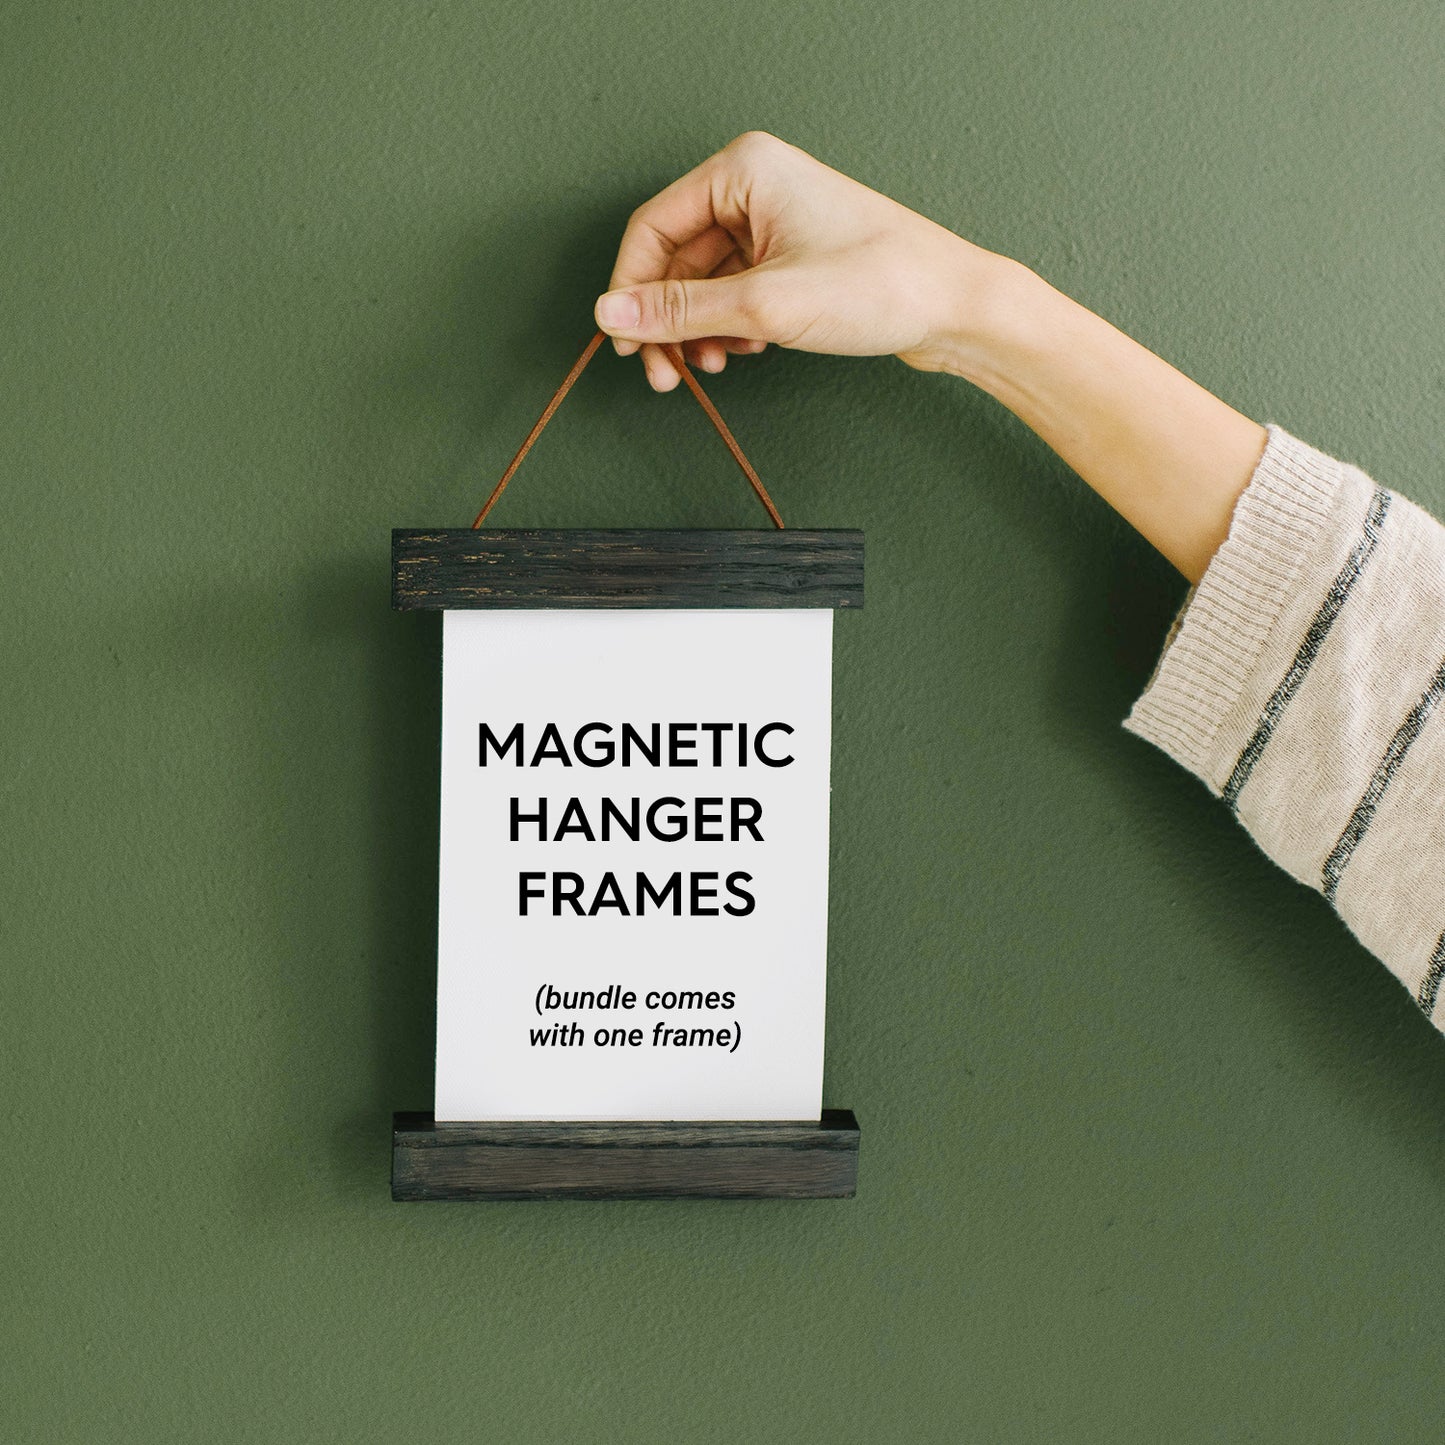 11x14 Canvas Bundle - Pack of 5 Canvas for Painting and Magnetic Wood –  Hanger Frames